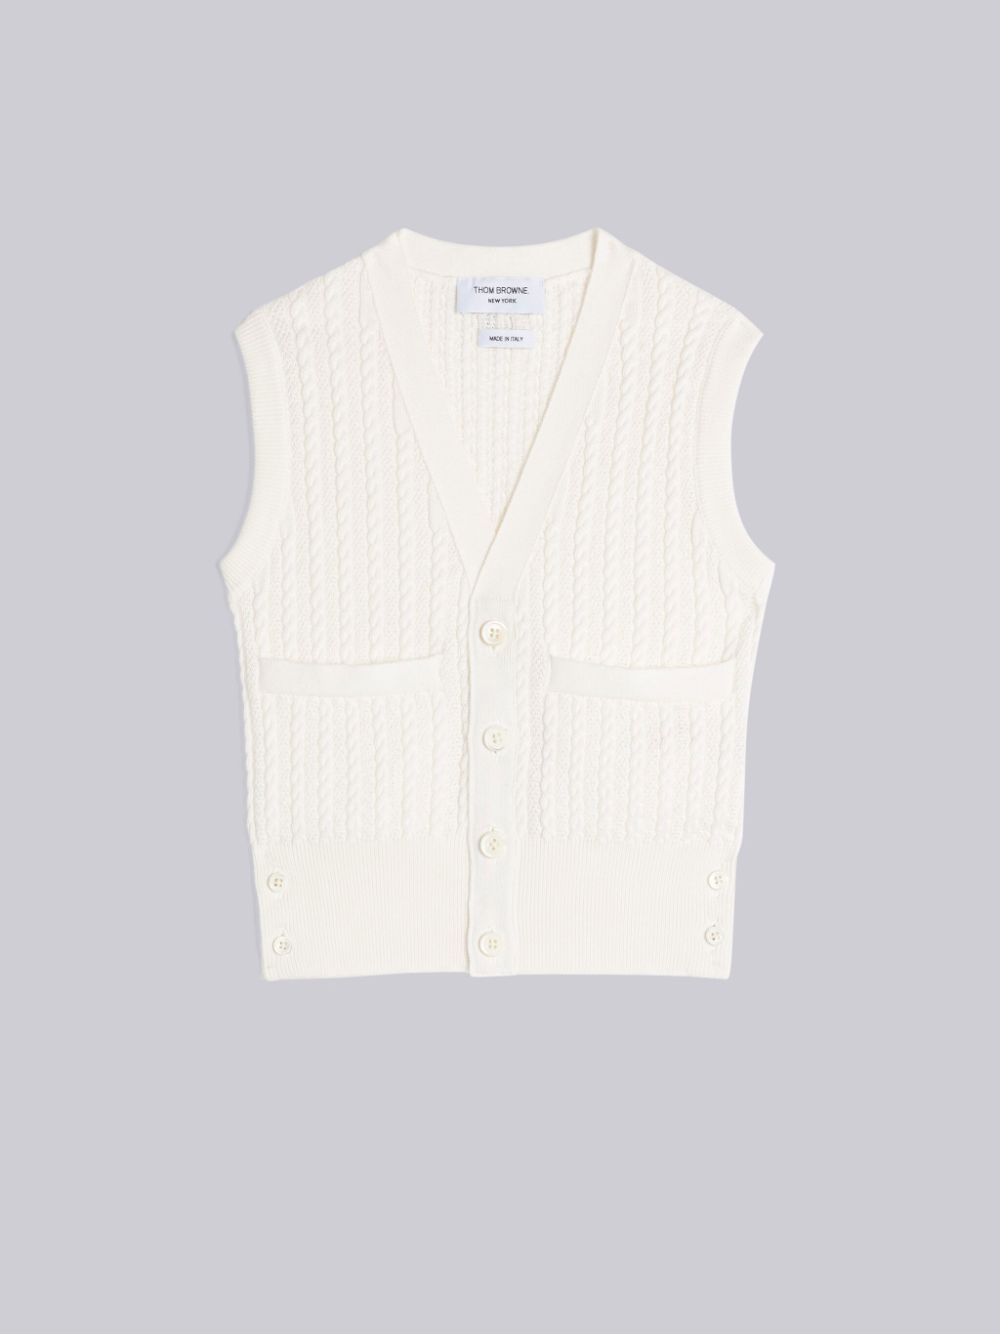 Shop Thom Browne Unisex In White